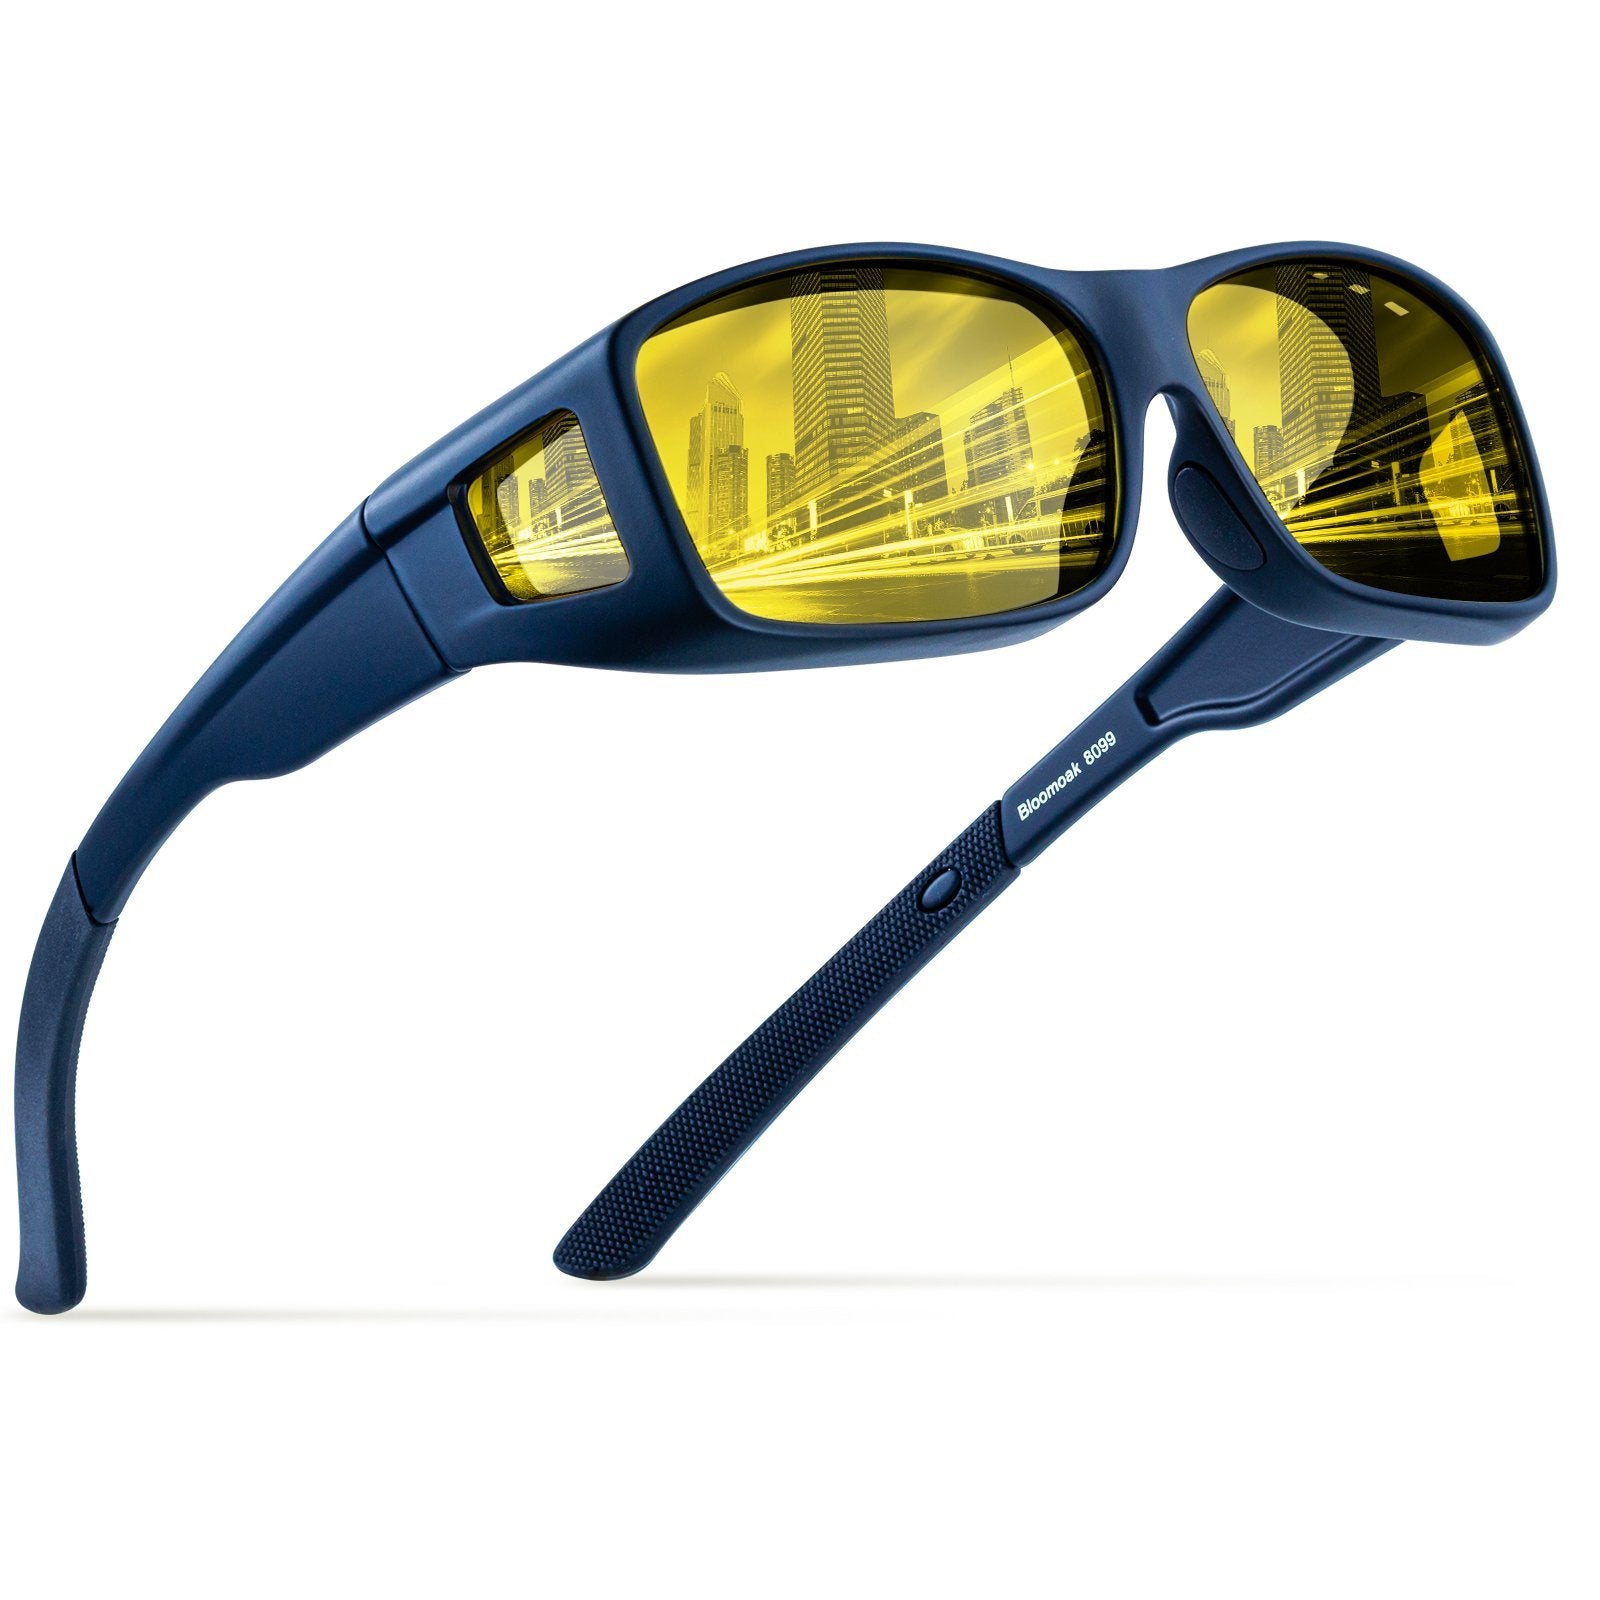 Gafas Reticulares Easview InnovaGoods – InnovaGoods Store